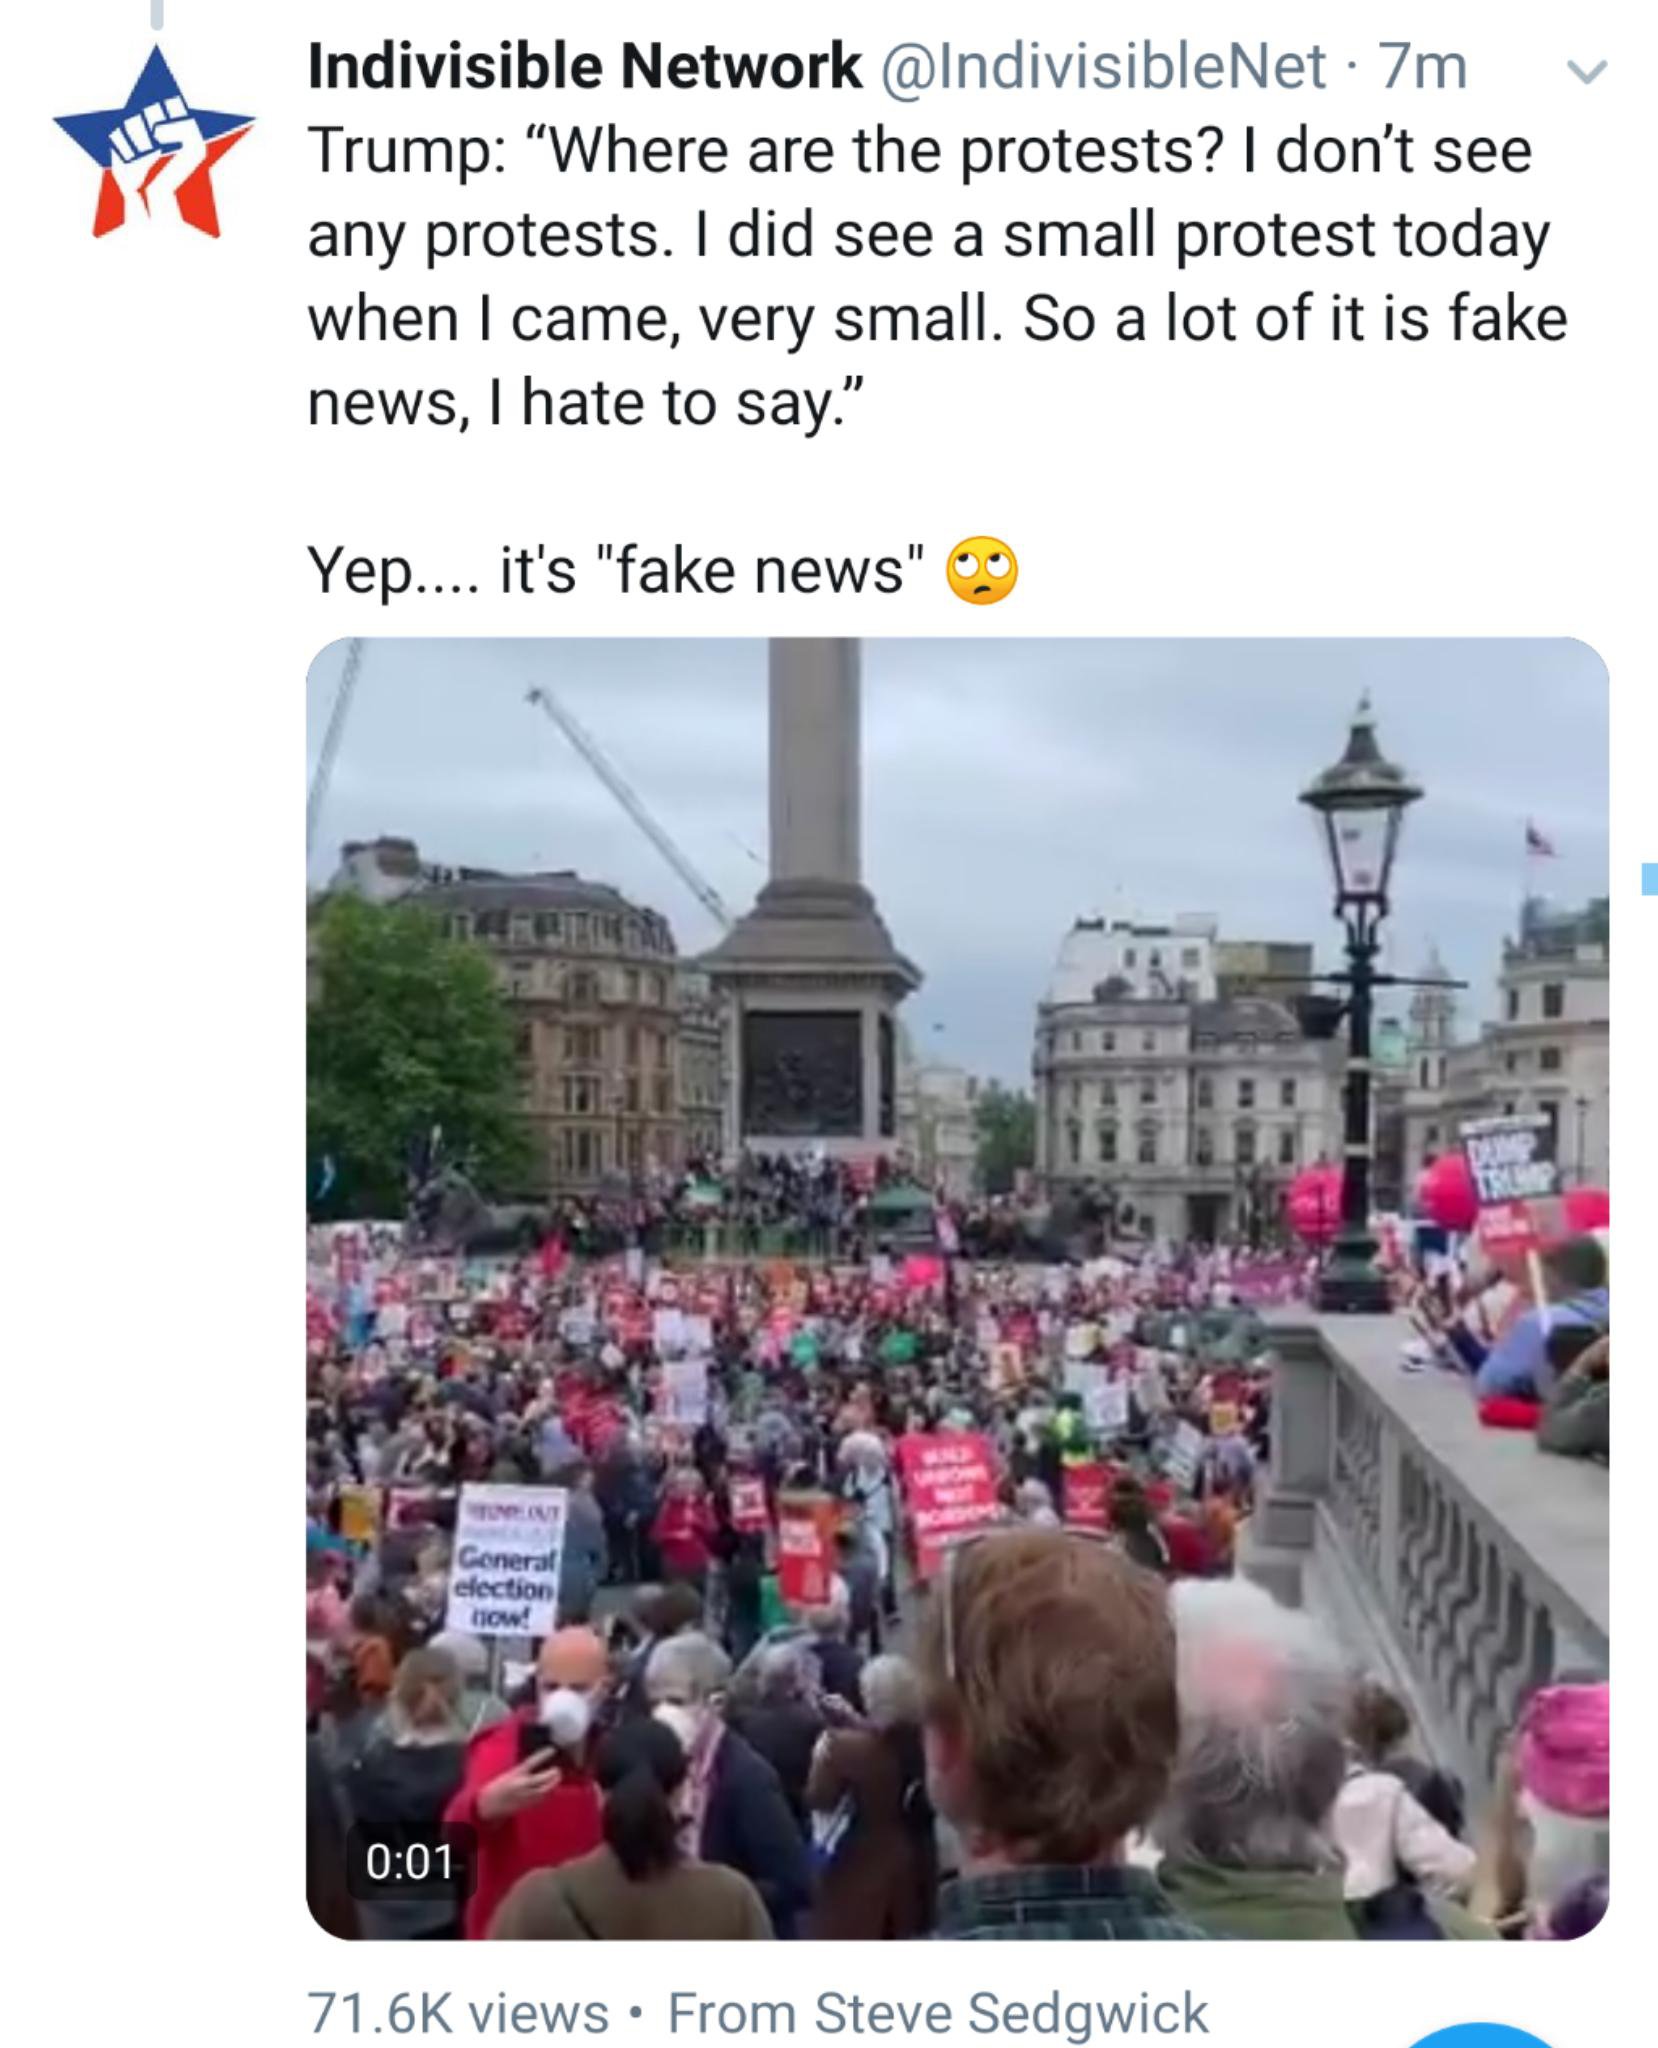 political meme trafalgar square - Indivisible Network 7m v Trump Where are the protests? I don't see any protests. I did see a small protest today when I came, very small. So a lot of it is fake news, I hate to say." Yep.... it's "fake news" Tvt General e